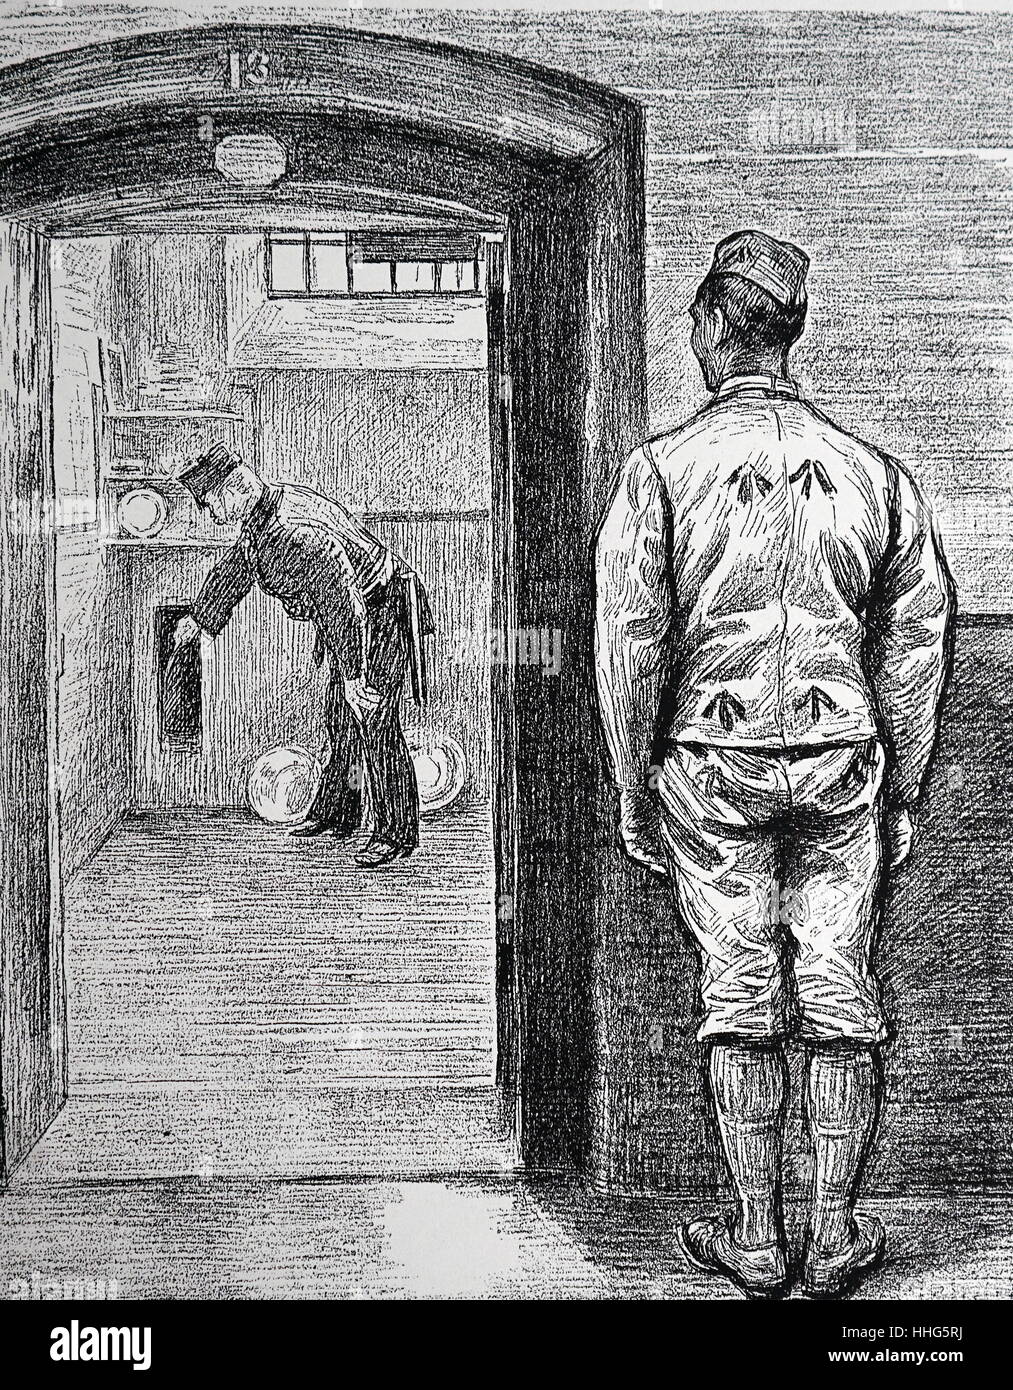 Warder inspects a prison cell, before locking up prisoner for the night. Wormwood scrubs prison, London. Prisoner in uniform with the Broad Arrow motif. London 1889 Stock Photo